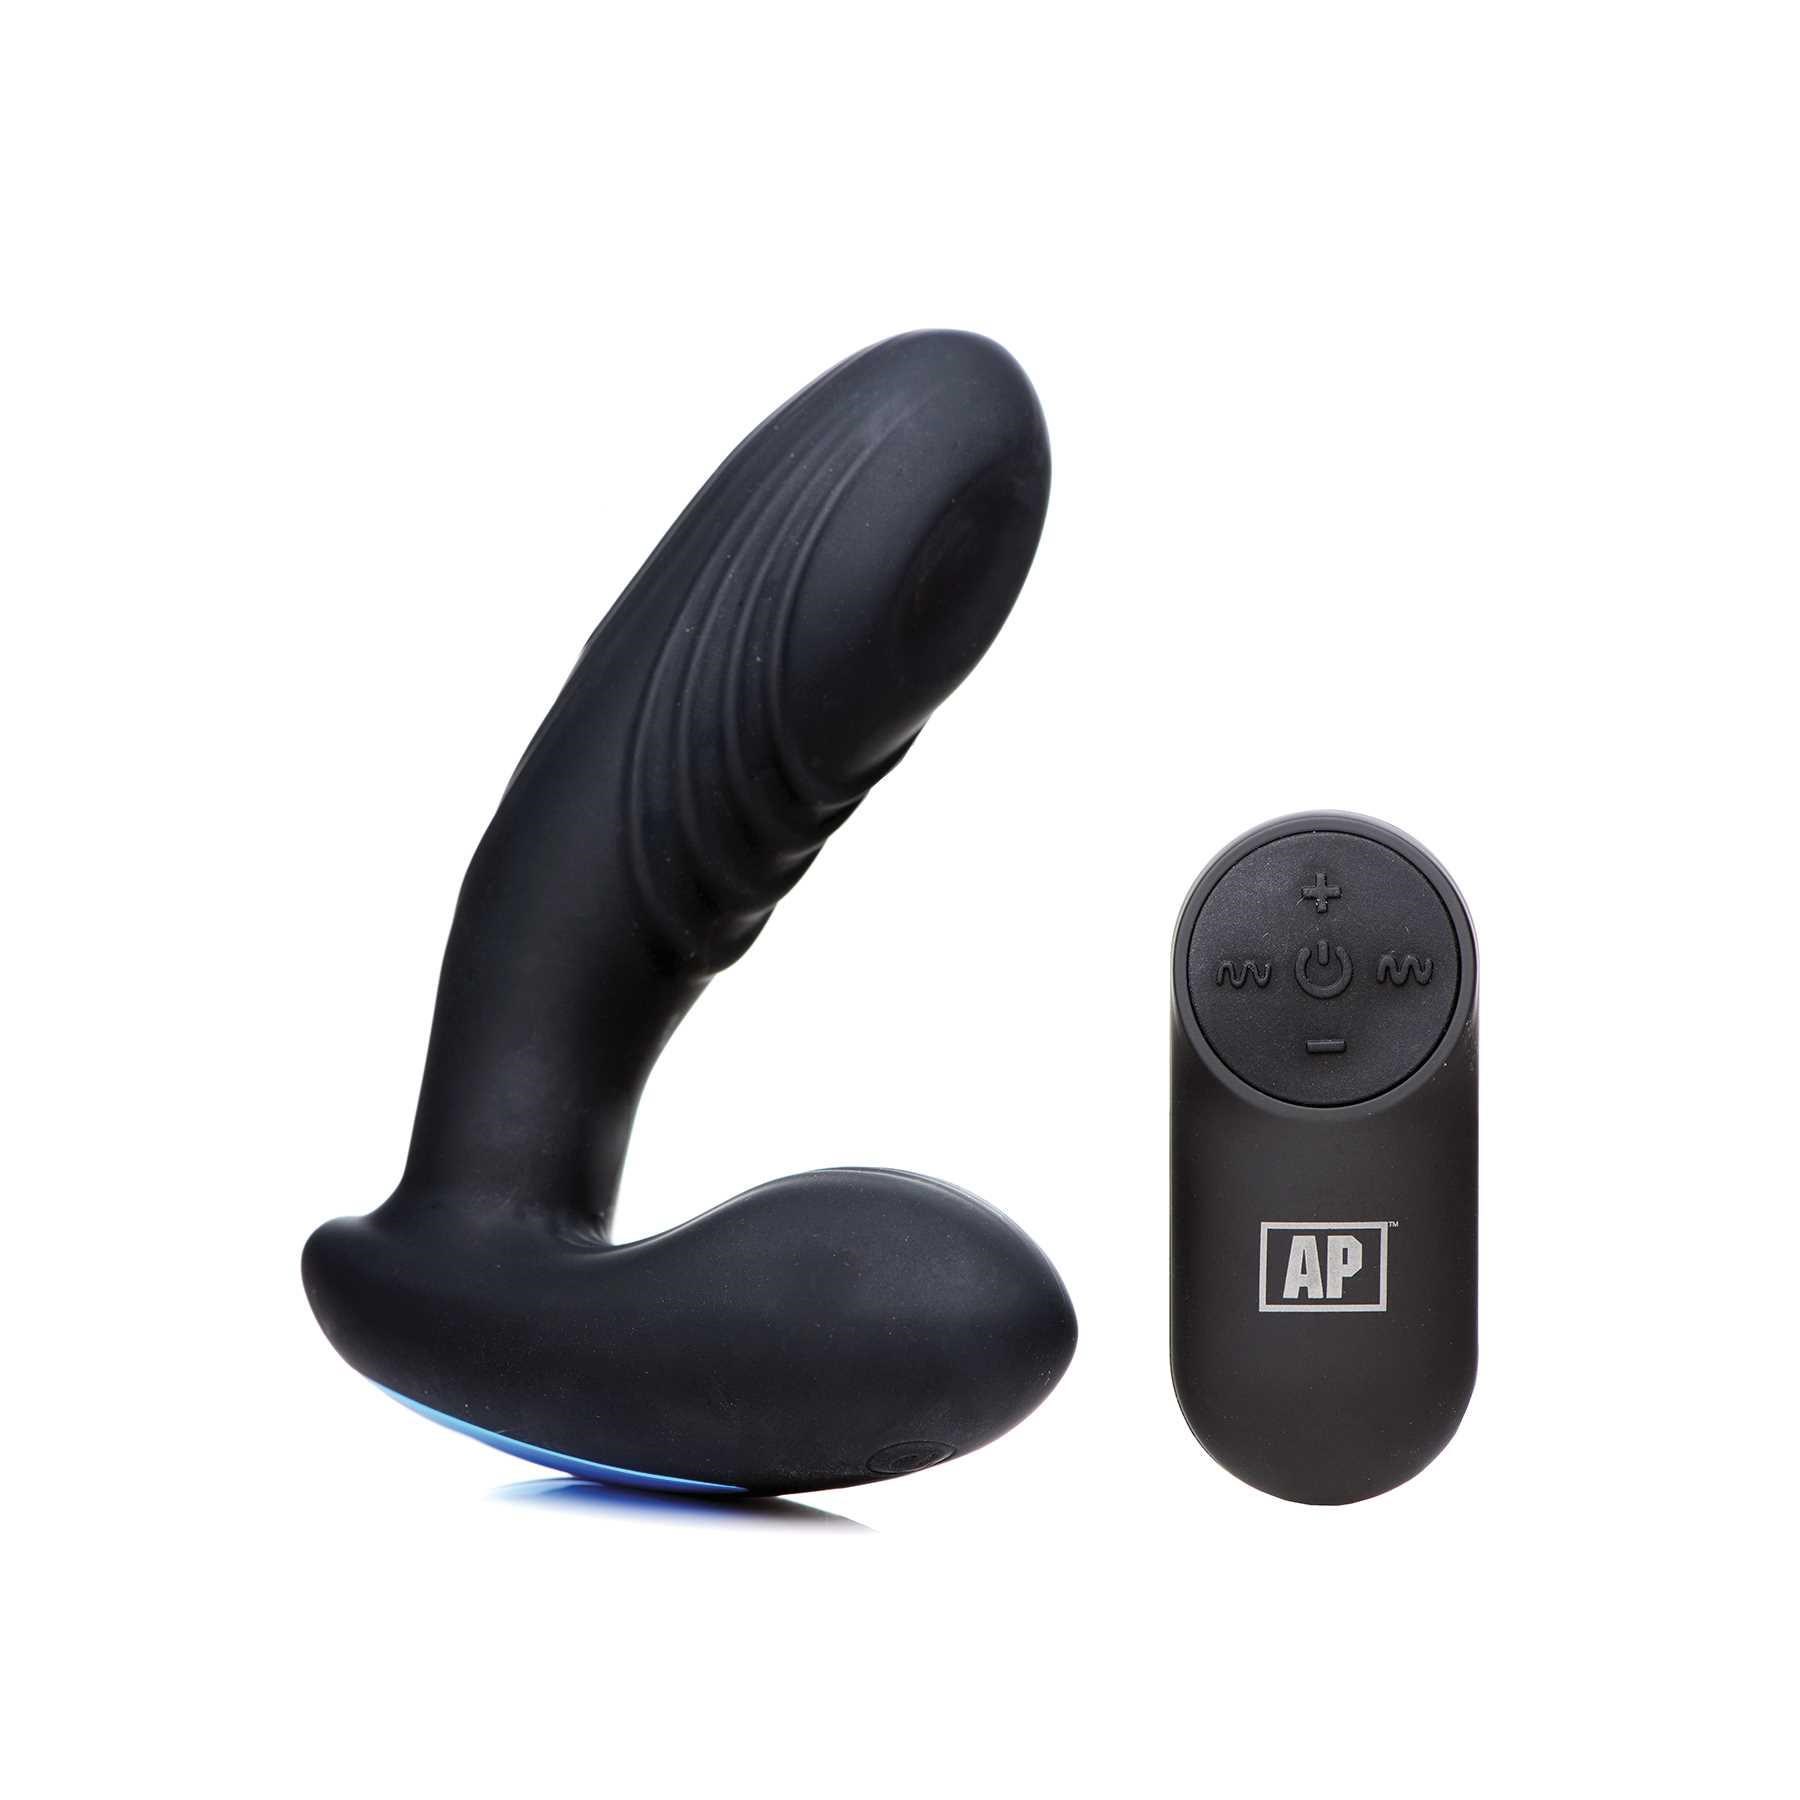 7X P-Thump Tapping Prostate Stimulator with remote control